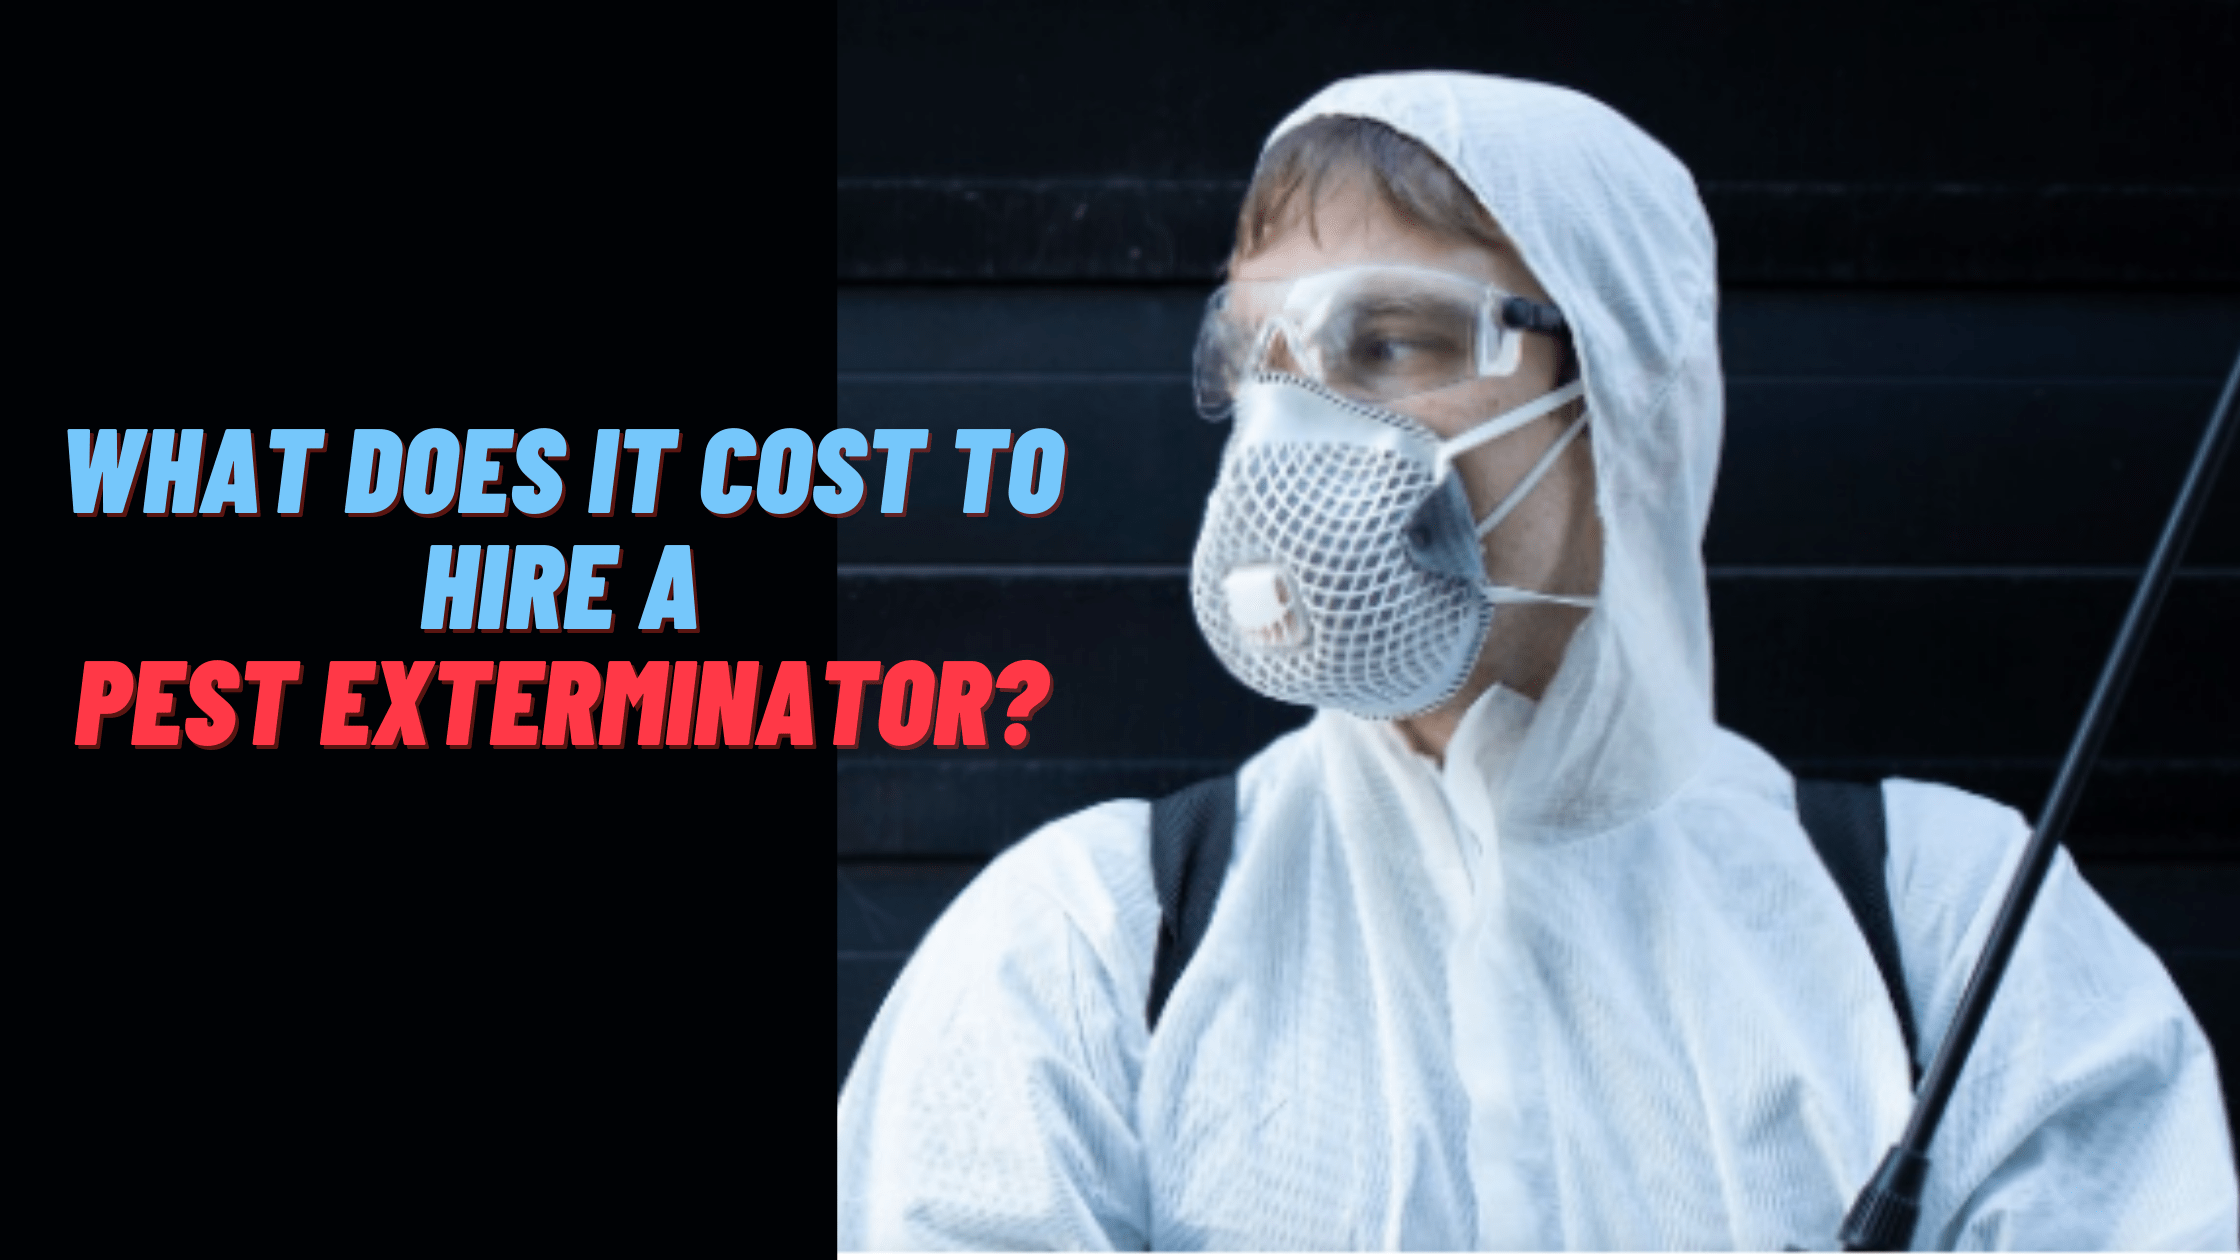 What Does It Cost To Hire A Pest Exterminator?